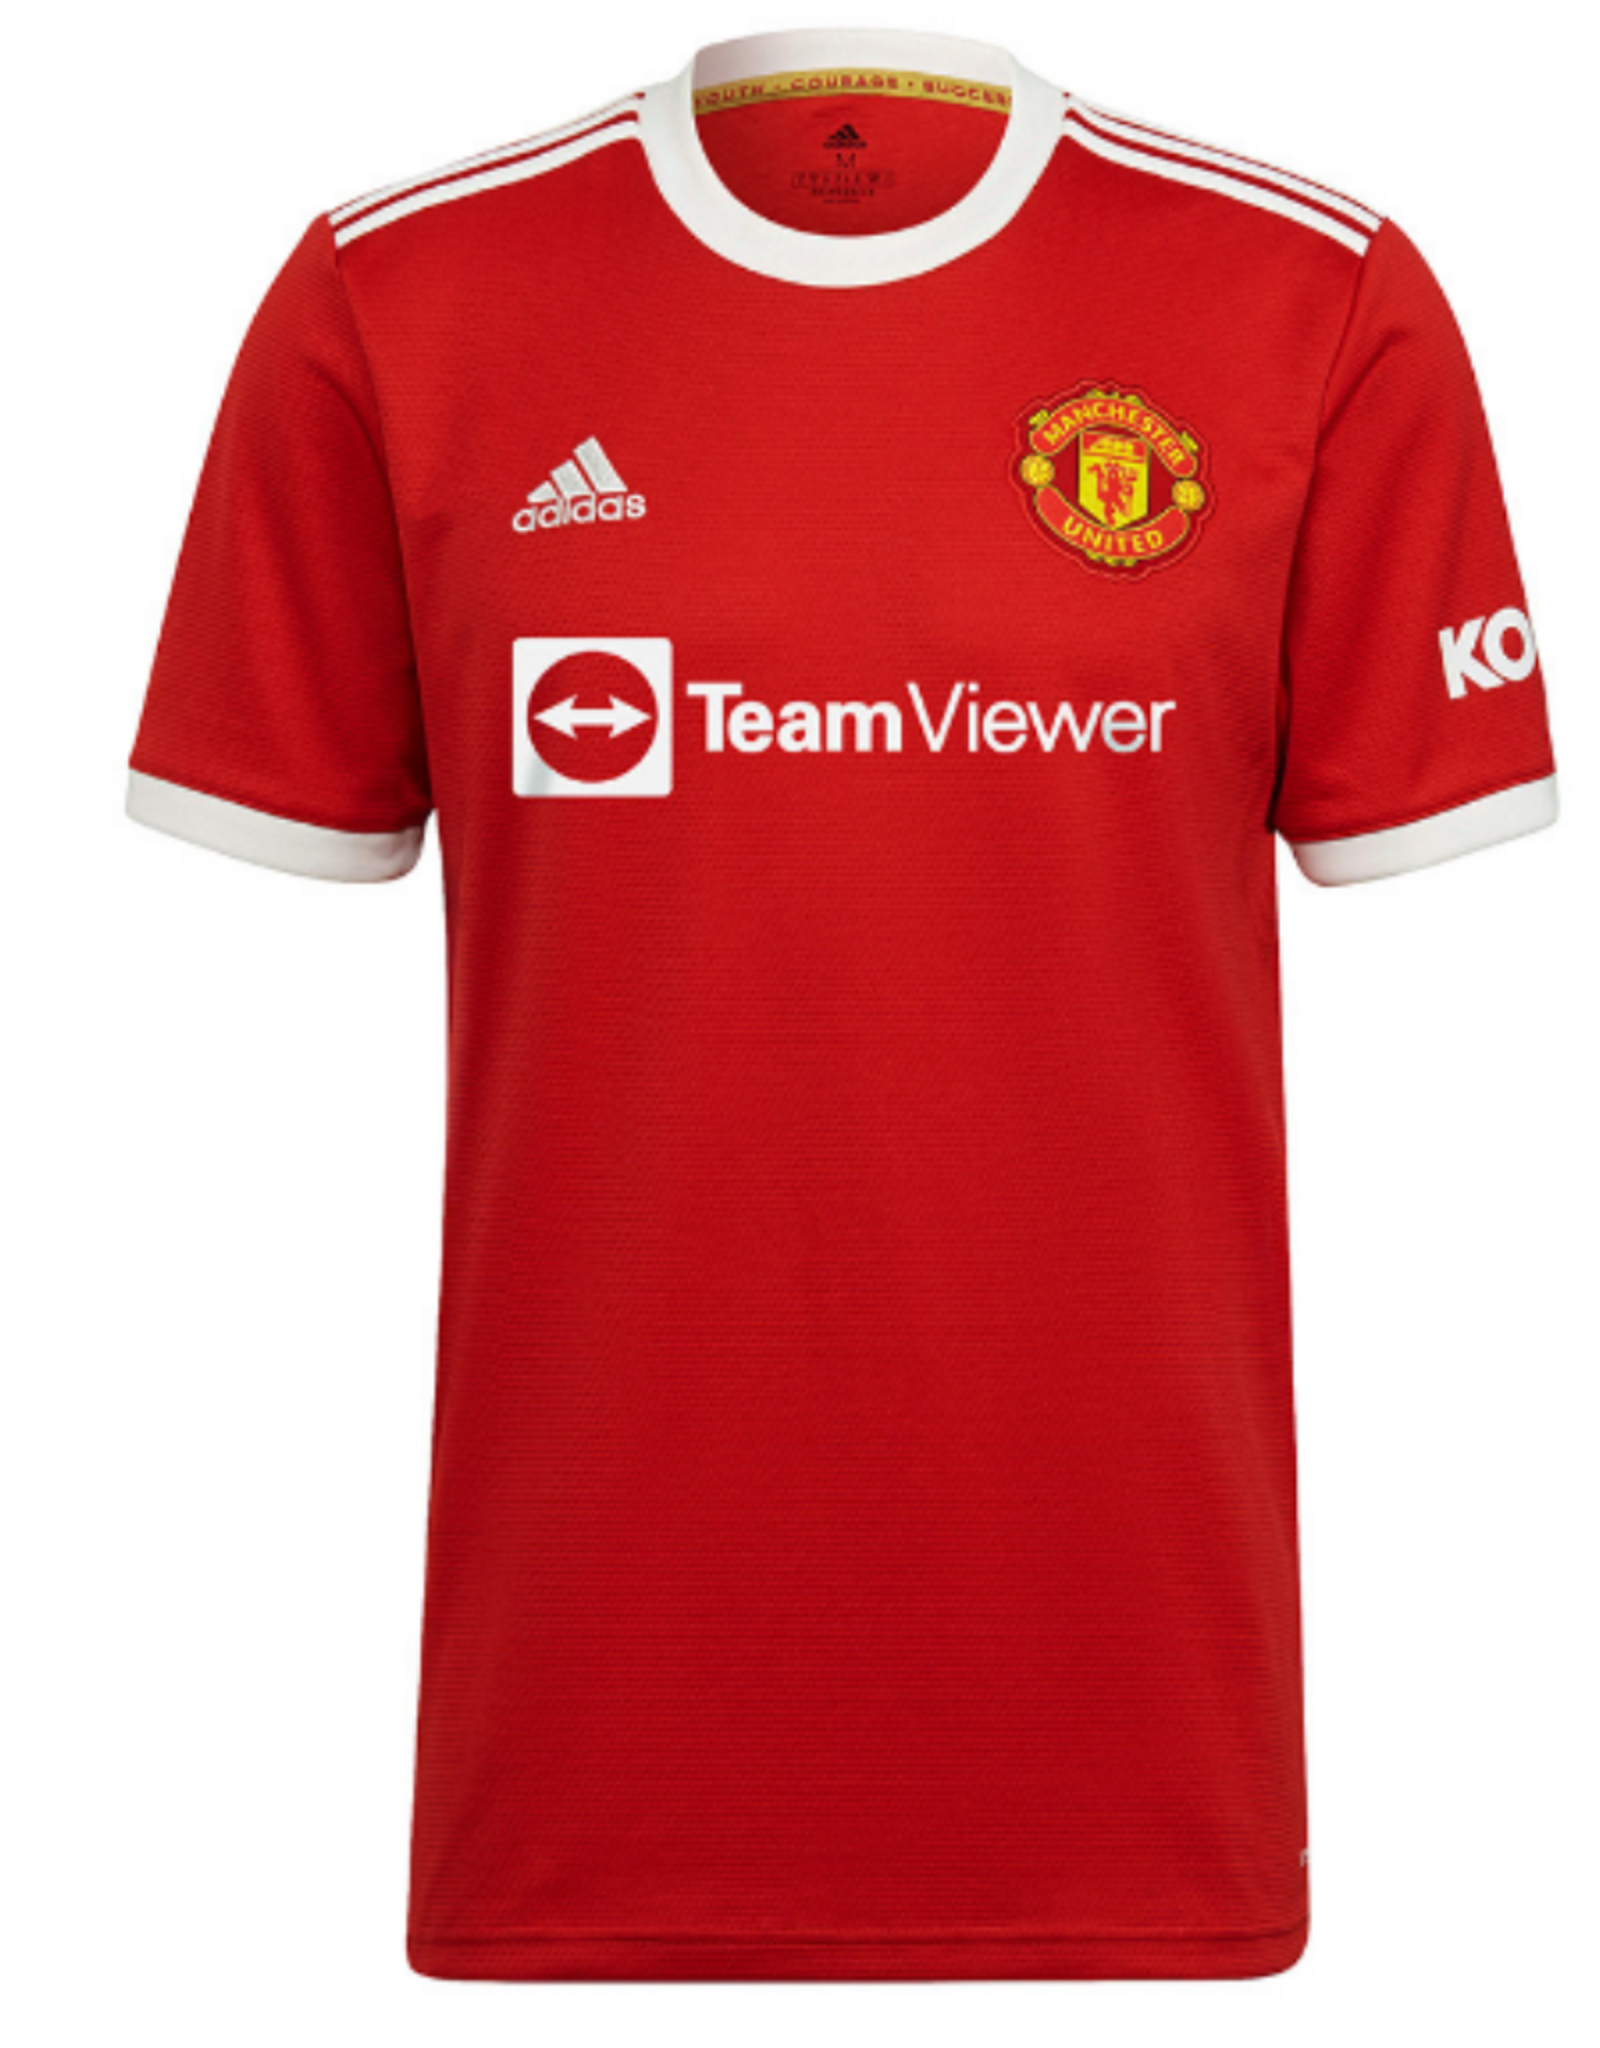 Adidas Adidas Men's '21 Soccer Jersey Manchester United Red